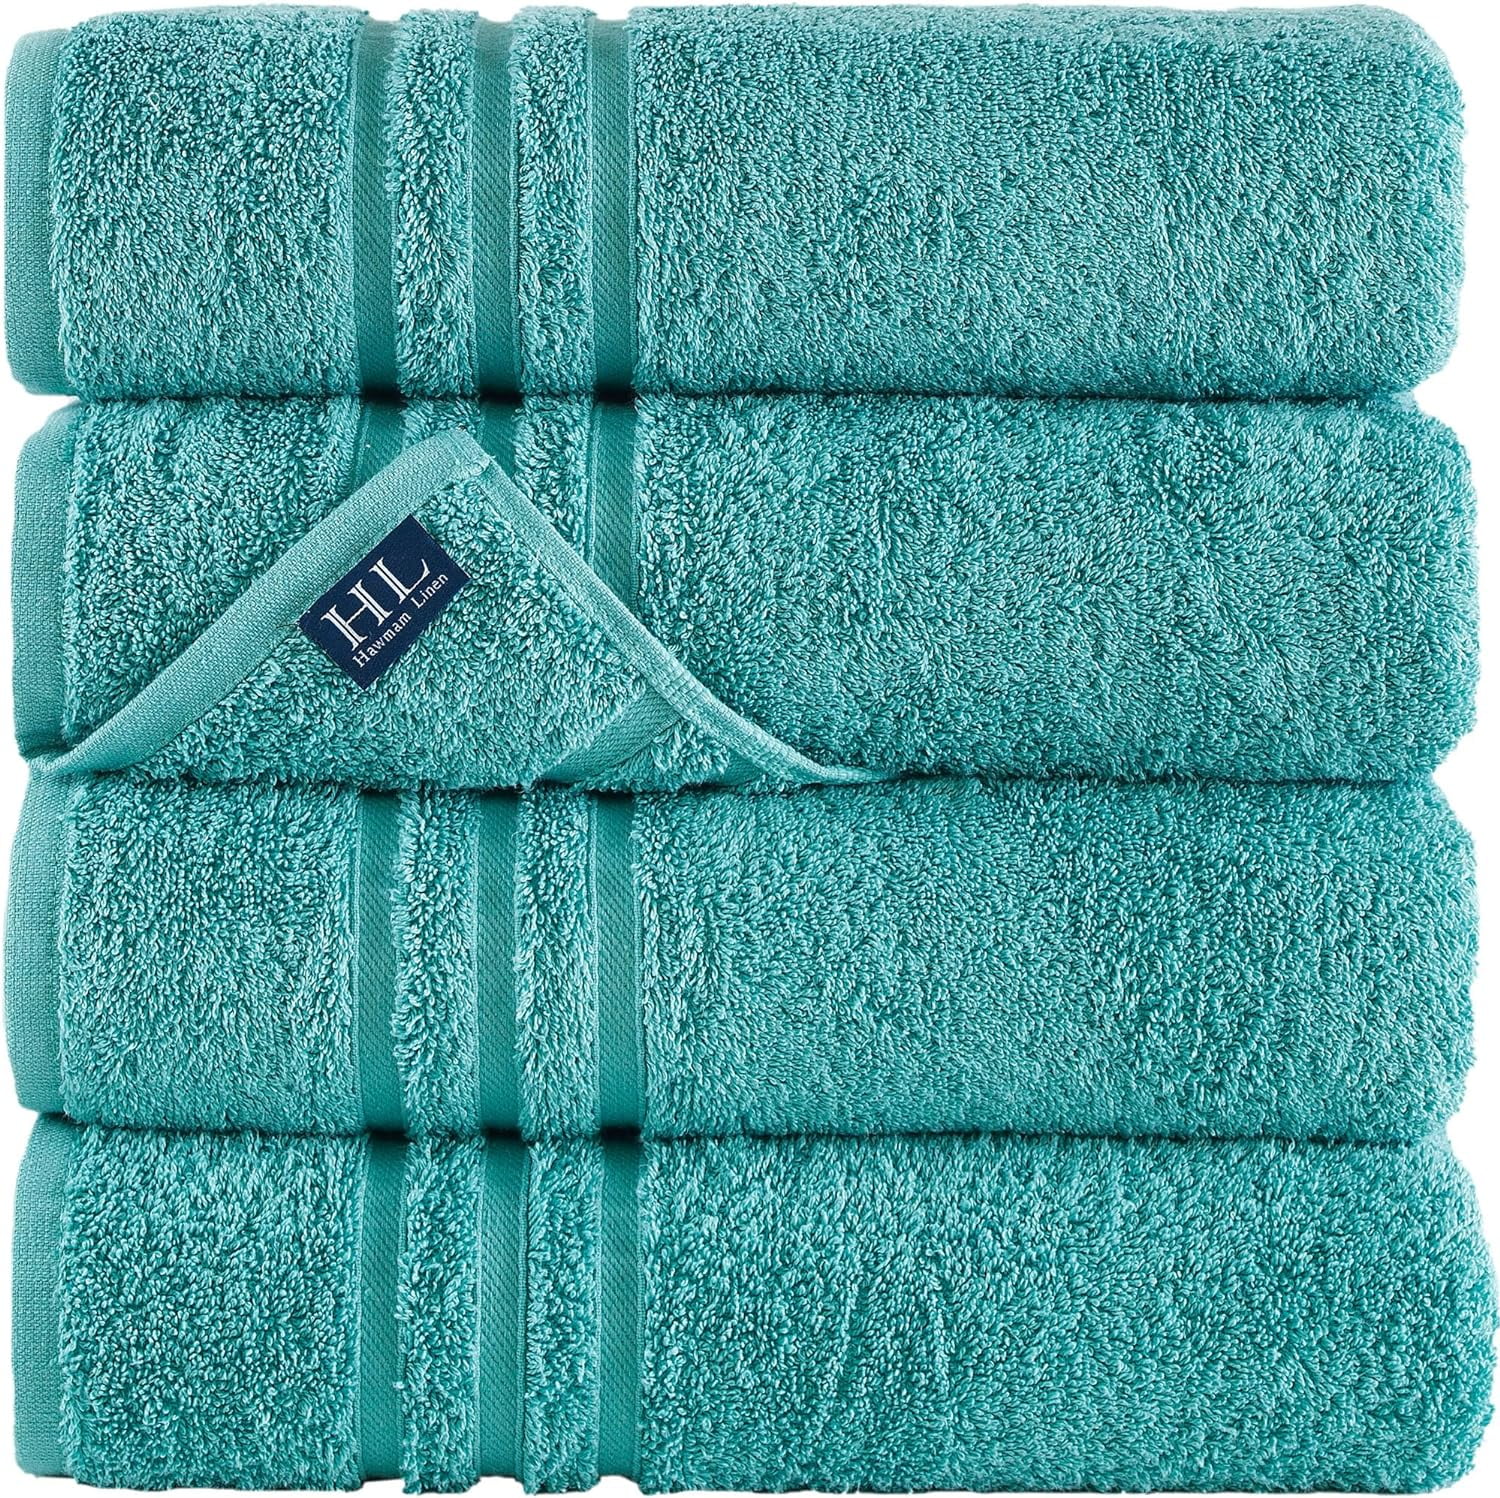 Hammam Linen 4 Piece Bath Towels Set - Water Green - Perfect for Daily Use